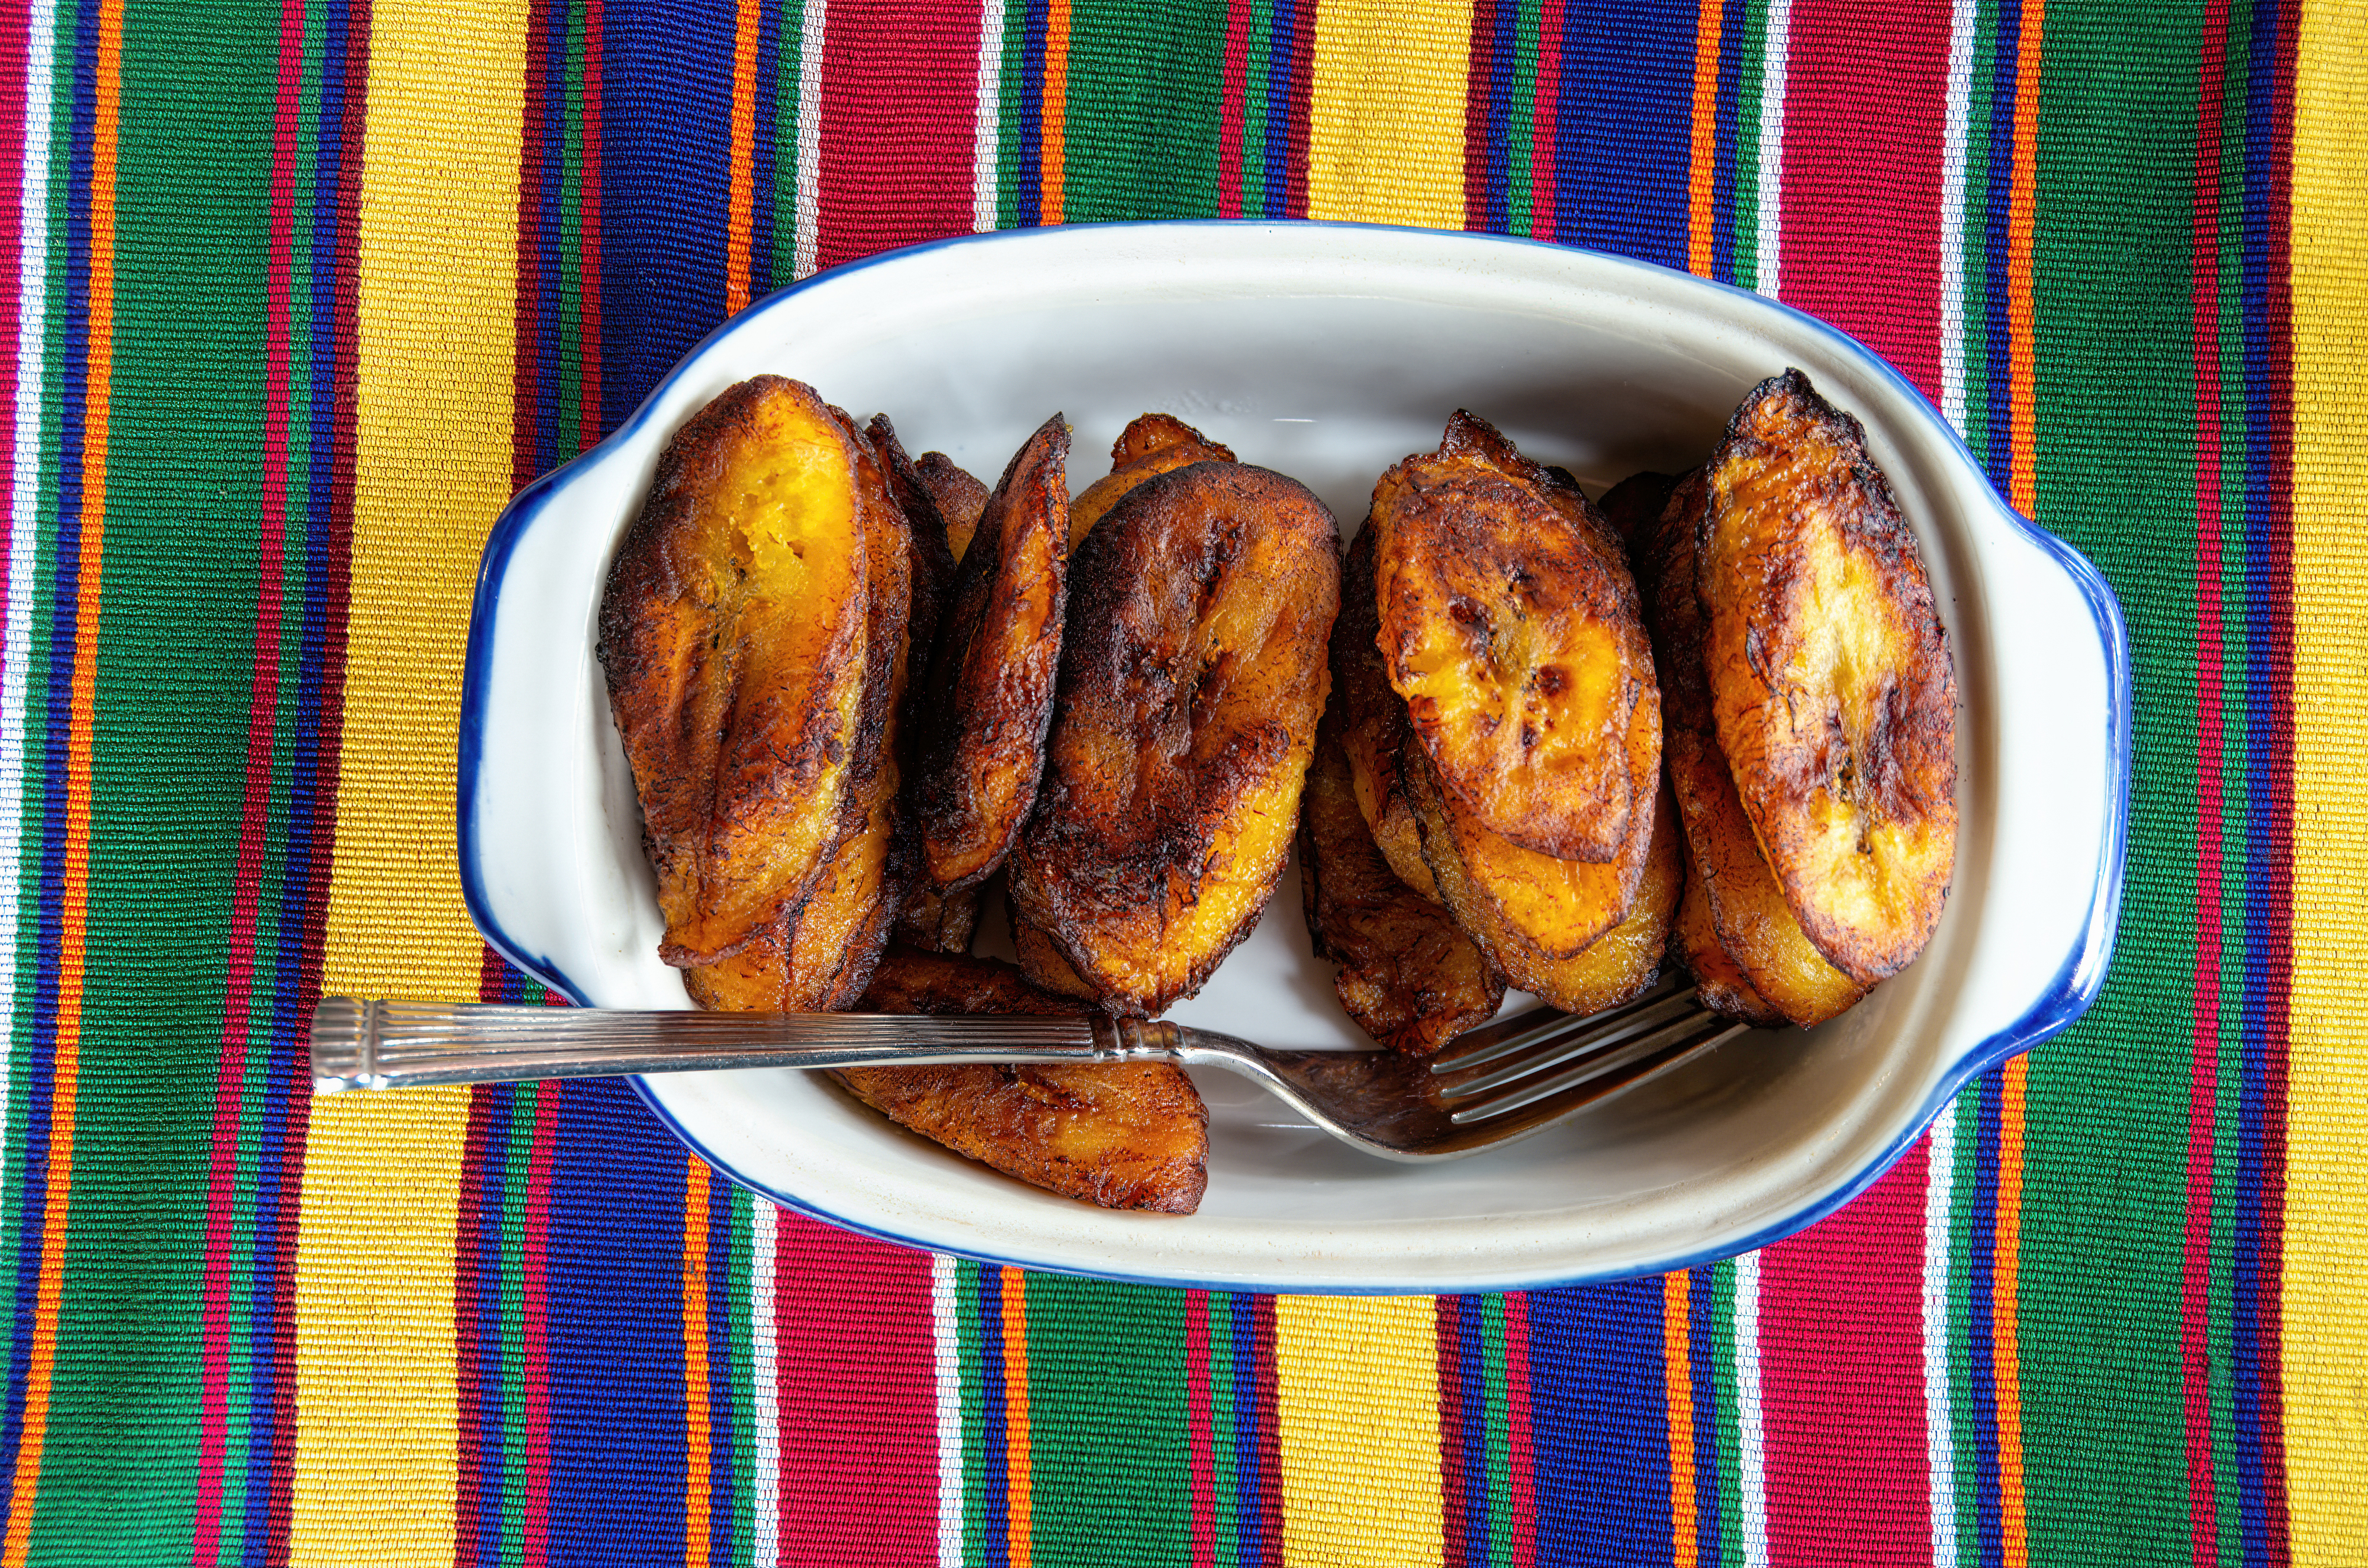 A dish of fried sweet plantains